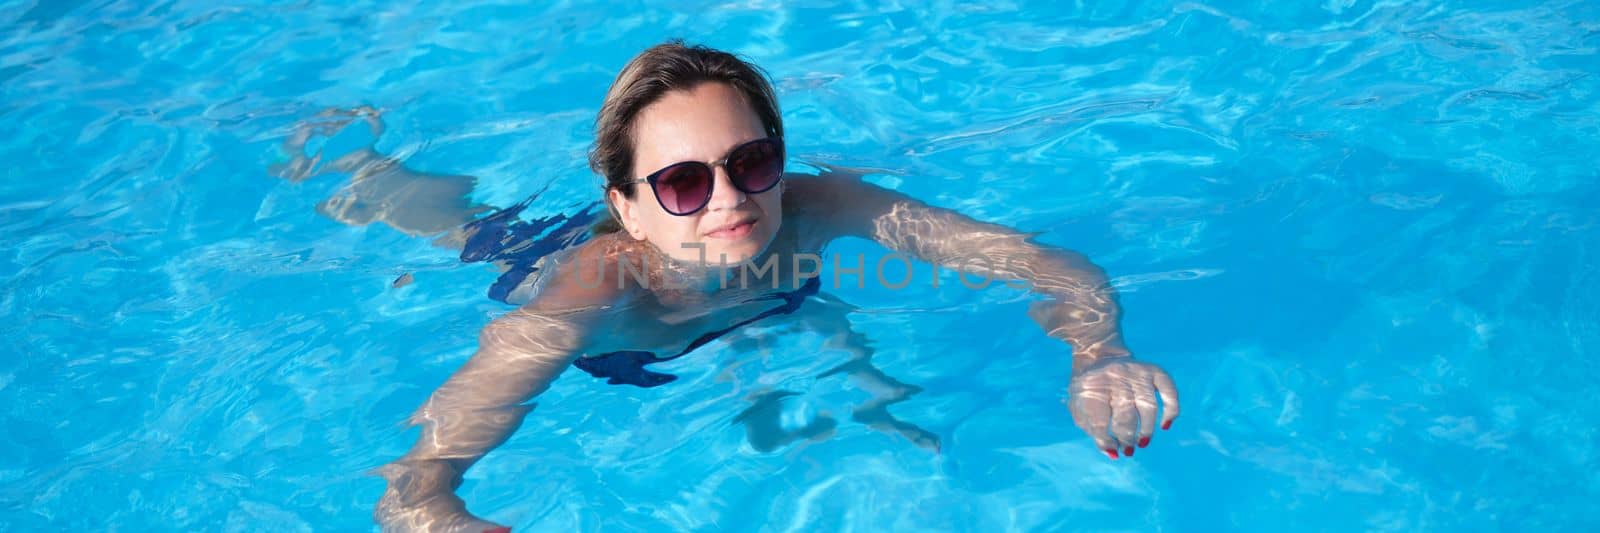 Woman in sunglasses swims in pool in summer by kuprevich